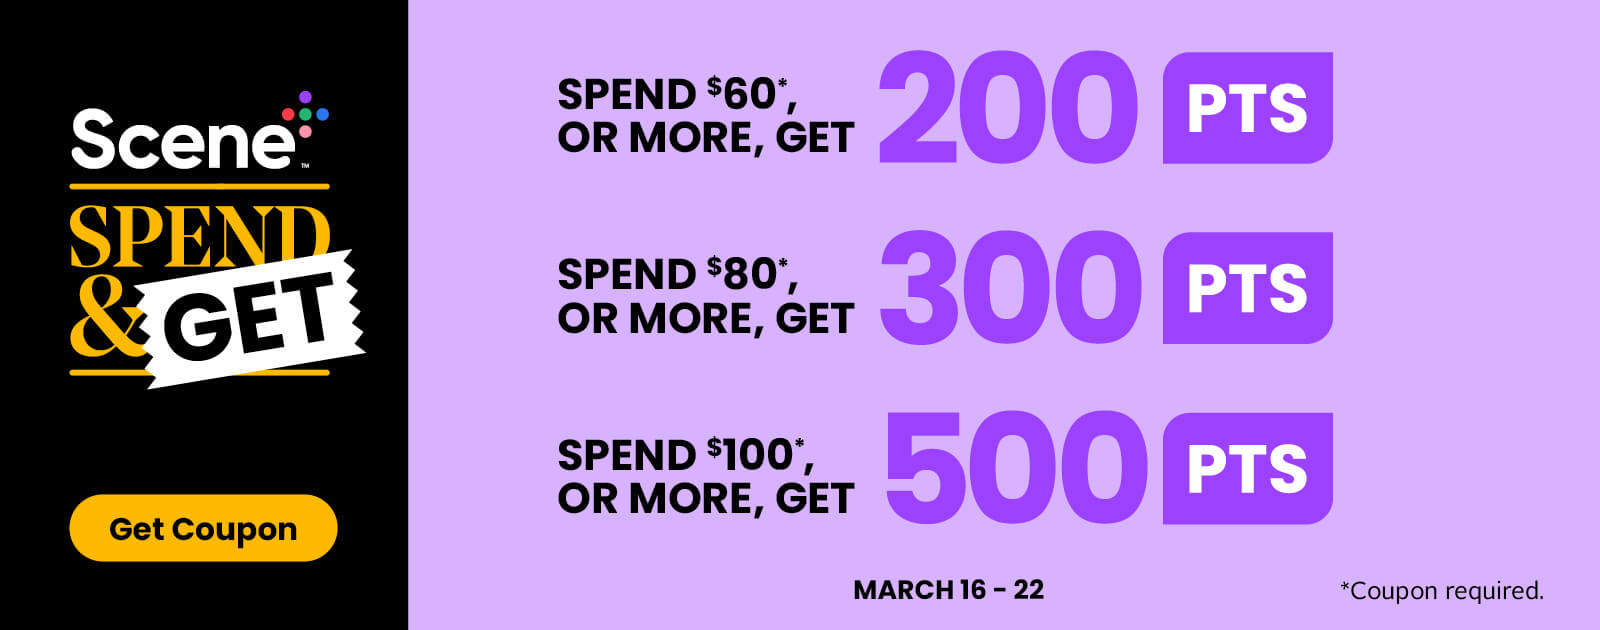 Scene+ Spend & Get. Spend $60 or more, get 200 points. Spend $80 or more, get 300 points. Spend $100 or more, get 500 points. March 16-22. Get Coupon.